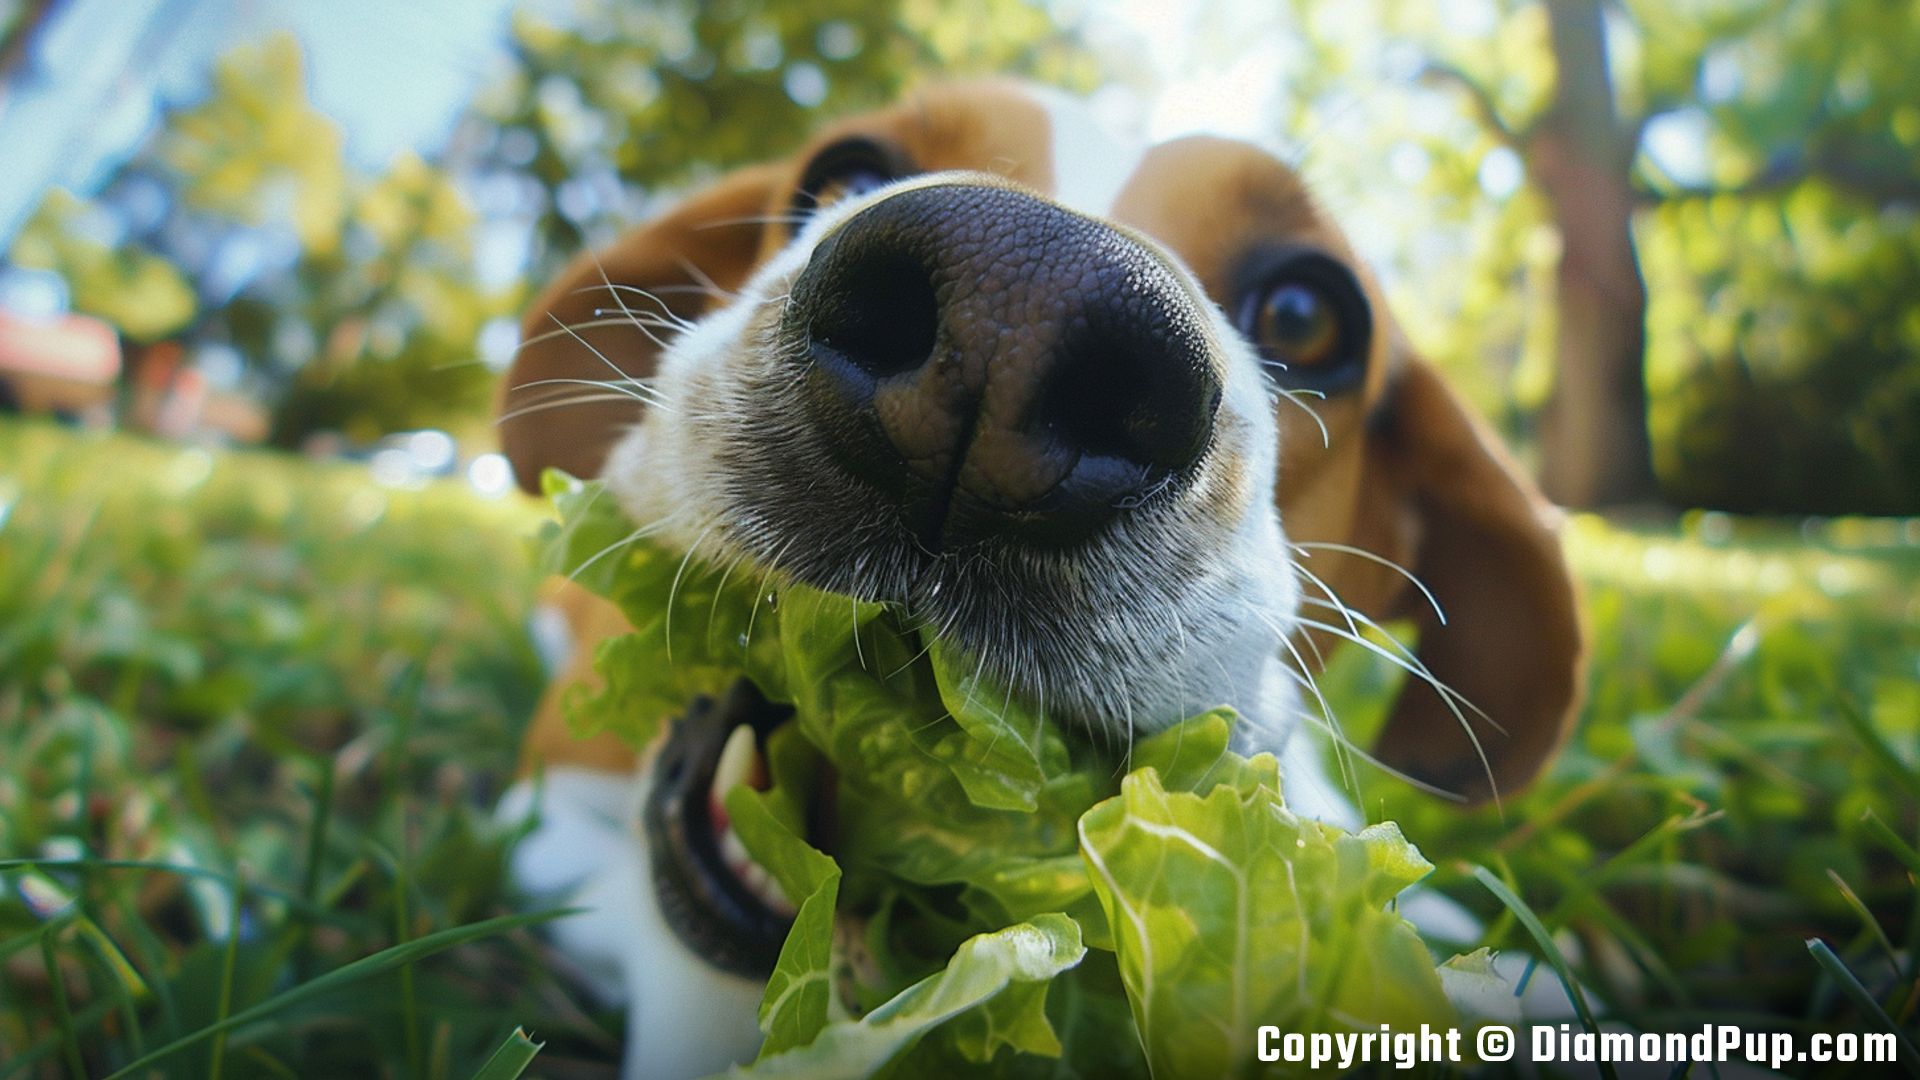 Photograph of a Playful Beagle Snacking on Lettuce